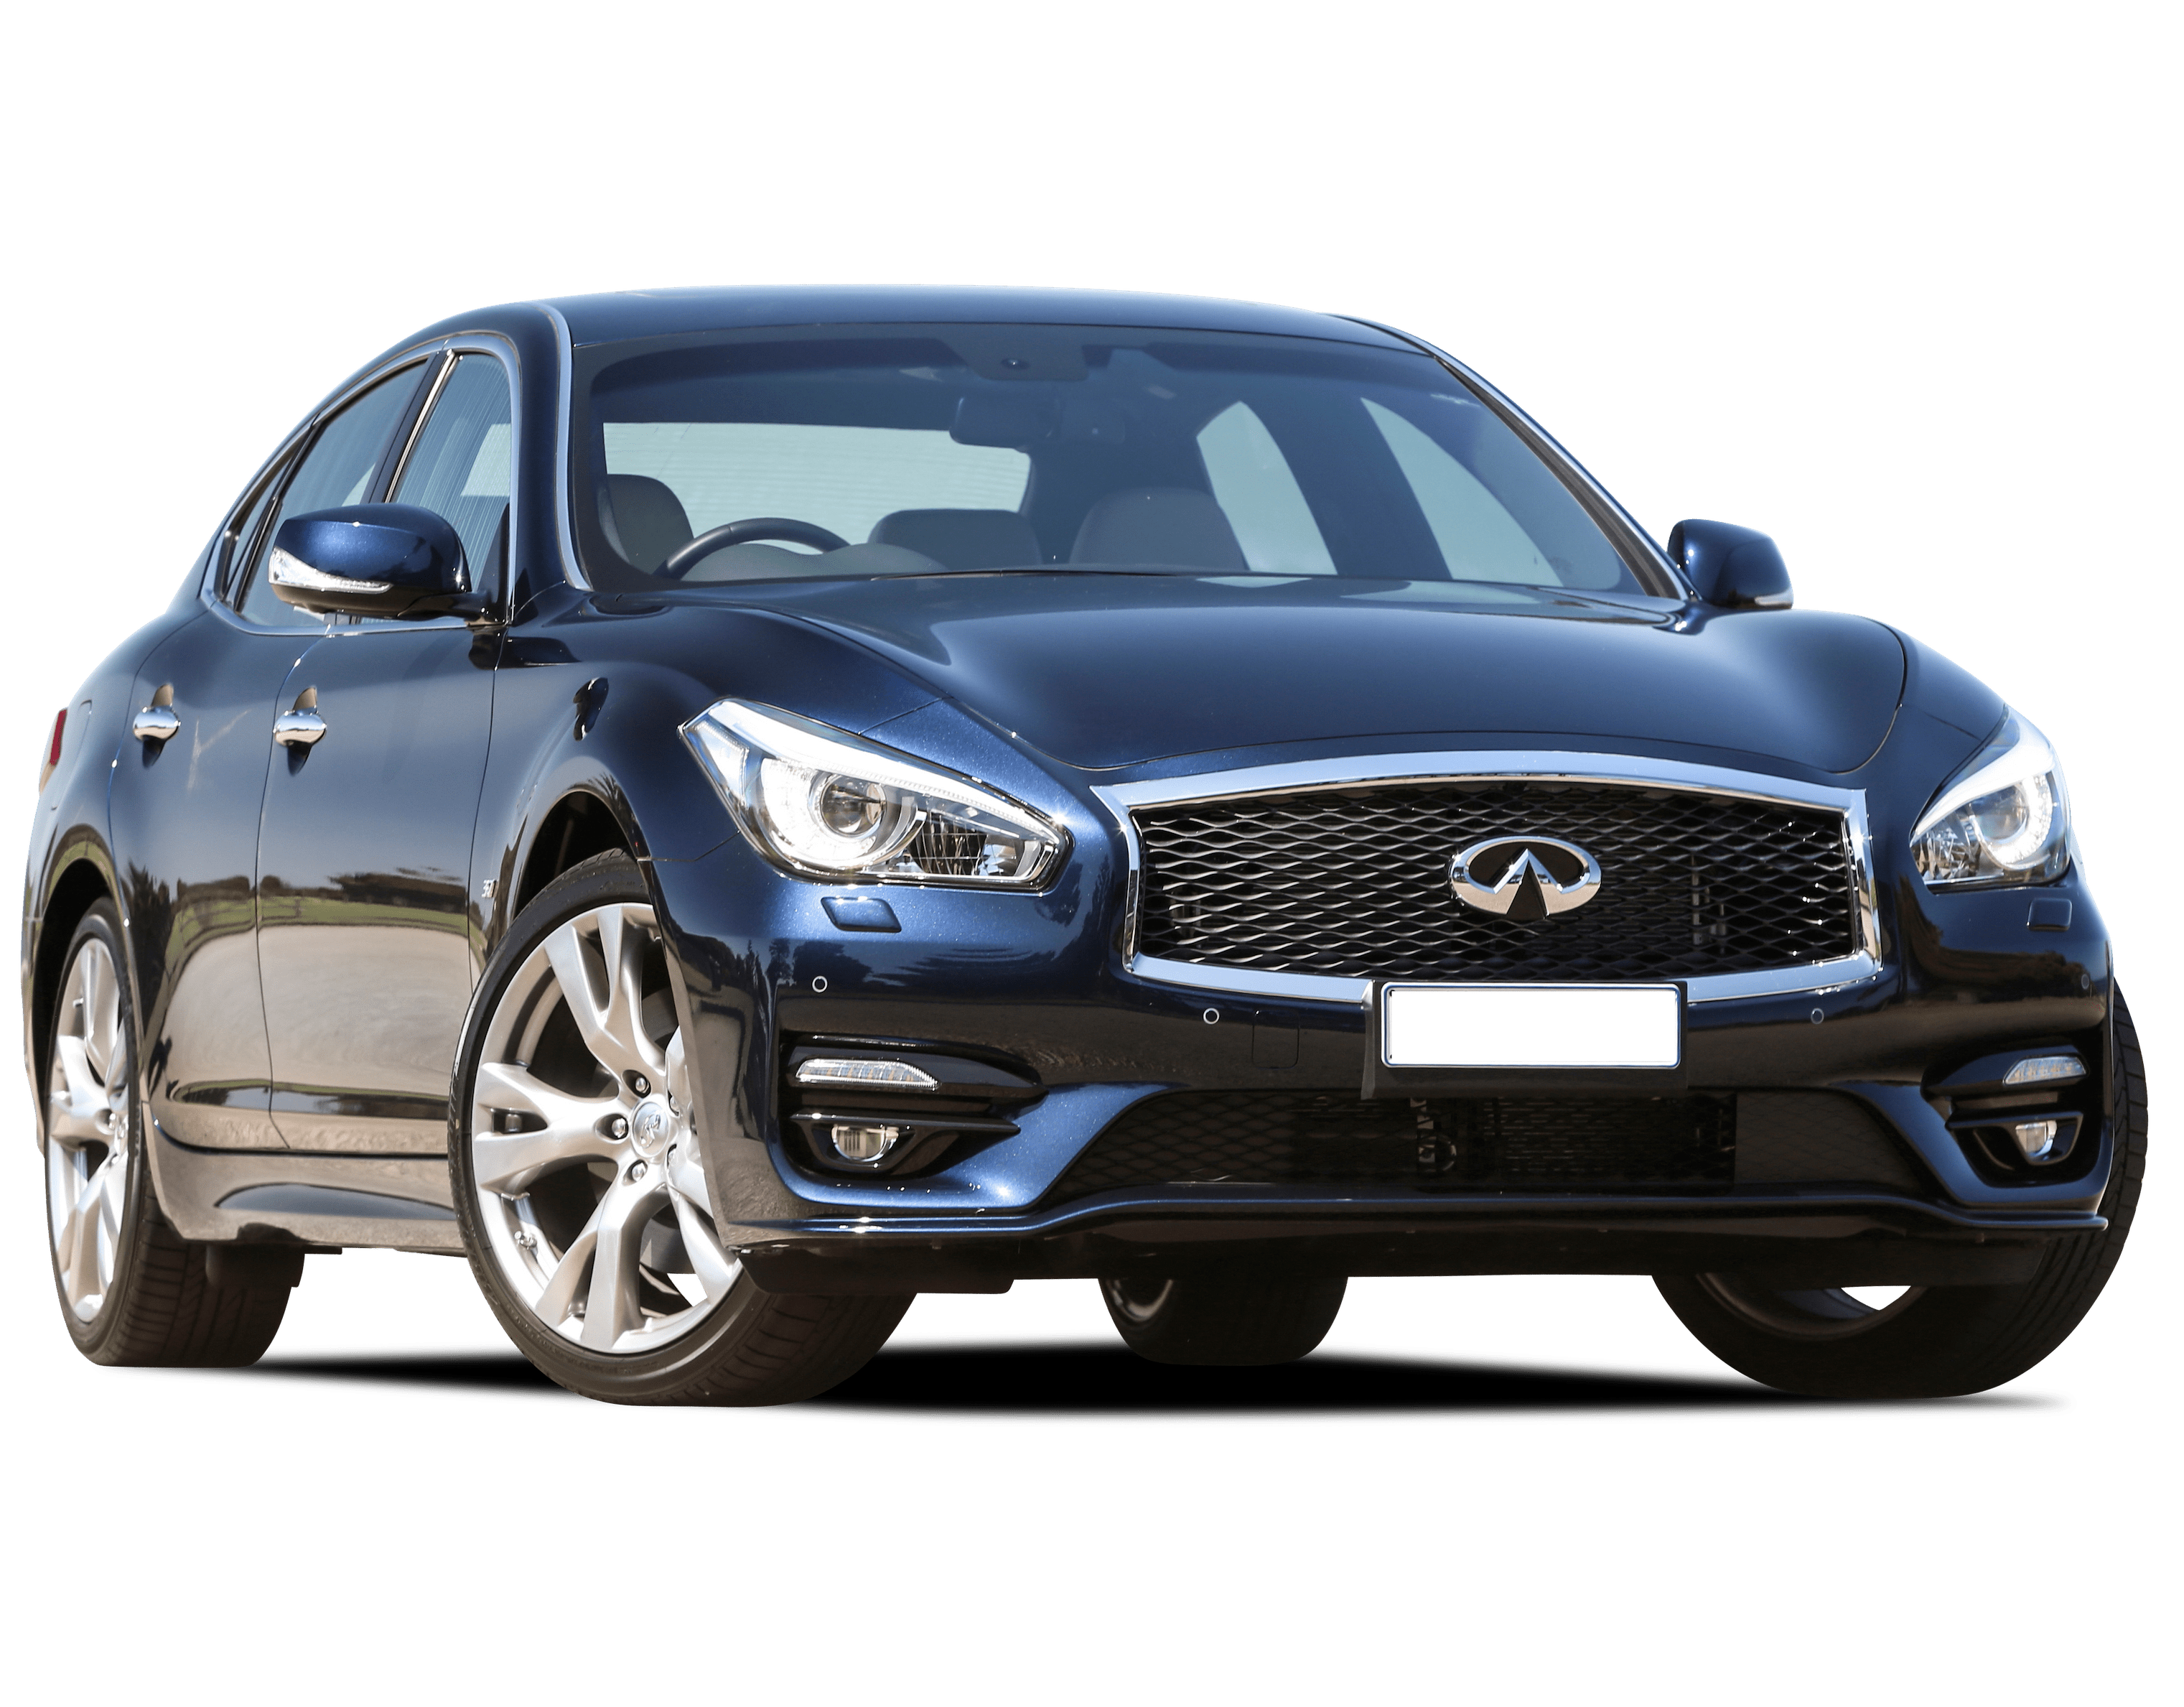 Infiniti Q70 Review For Sale Price Specs Models News Carsguide